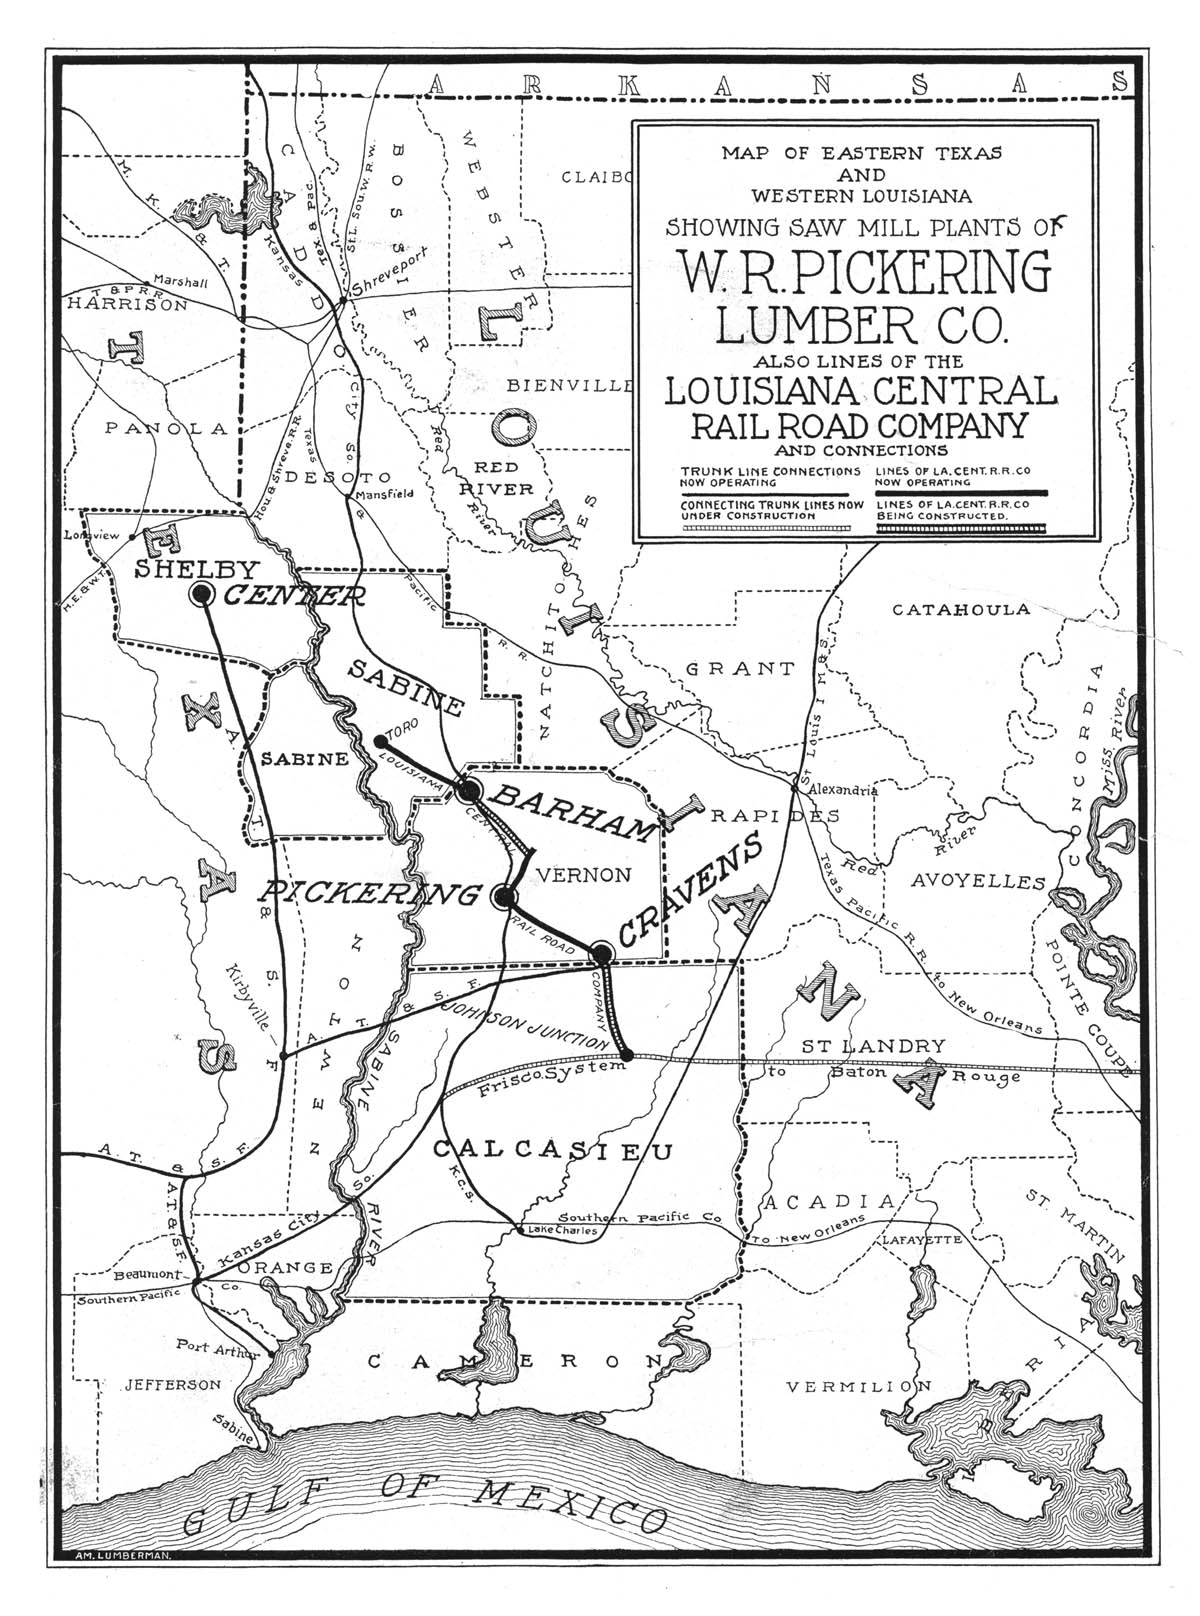 W.R. Pickering Lumber Company (La., Tex.), Map Showing Mills in Texas and Louisiana in 1906.